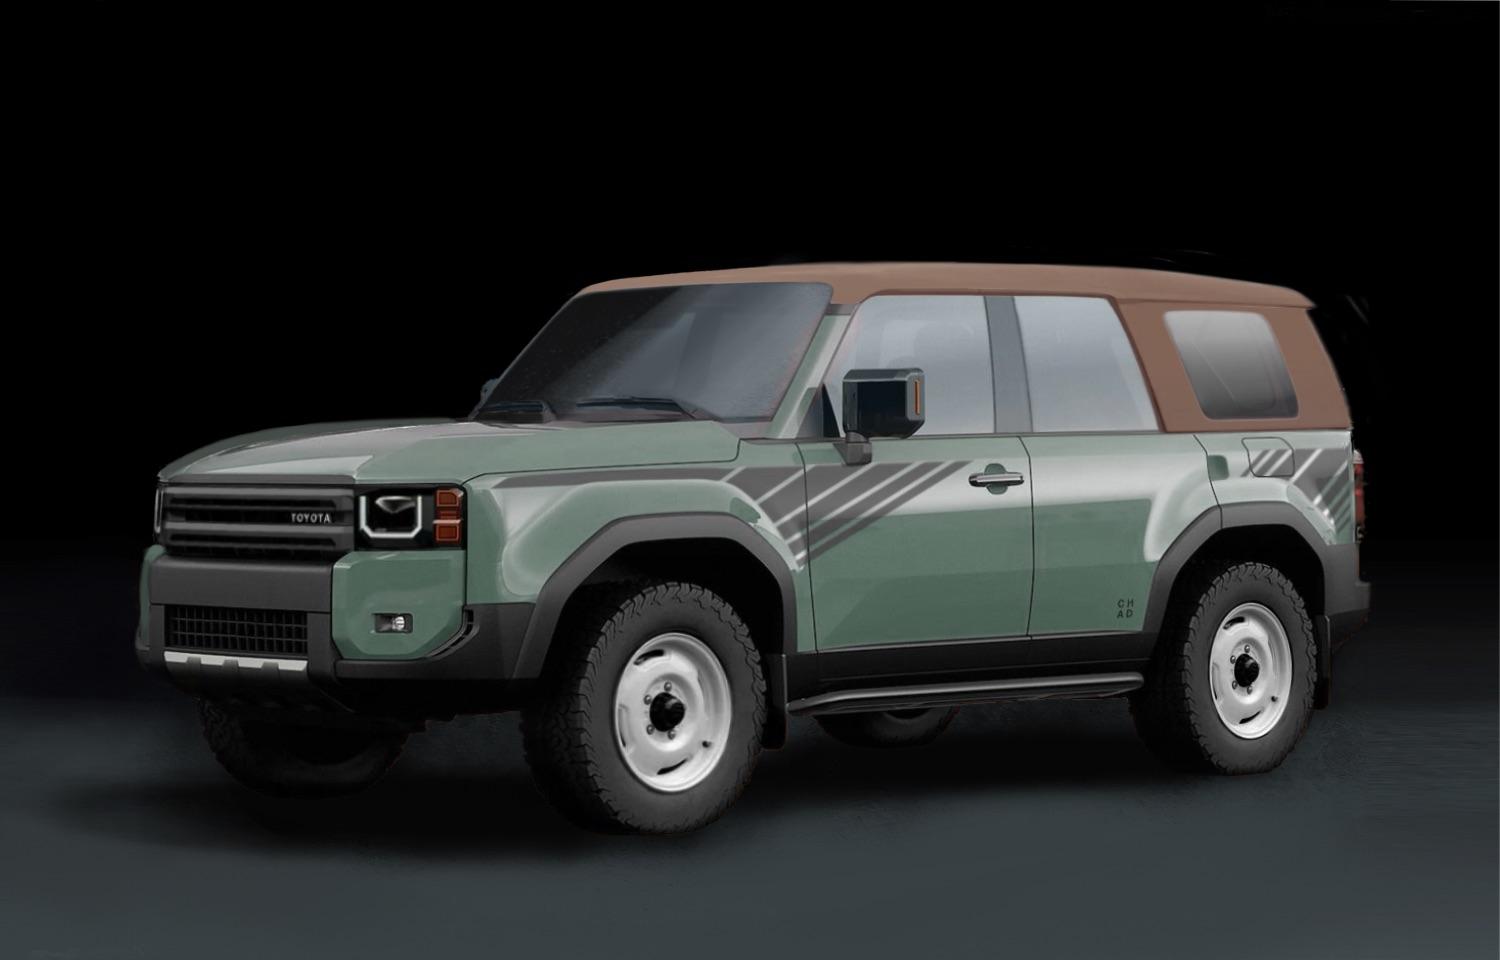 2025 Toyota 4runner Rendered: Topless 2025 4Runner based on the LC250. 29CC32DF-82CE-4C01-91EC-F5F51D6C50BE